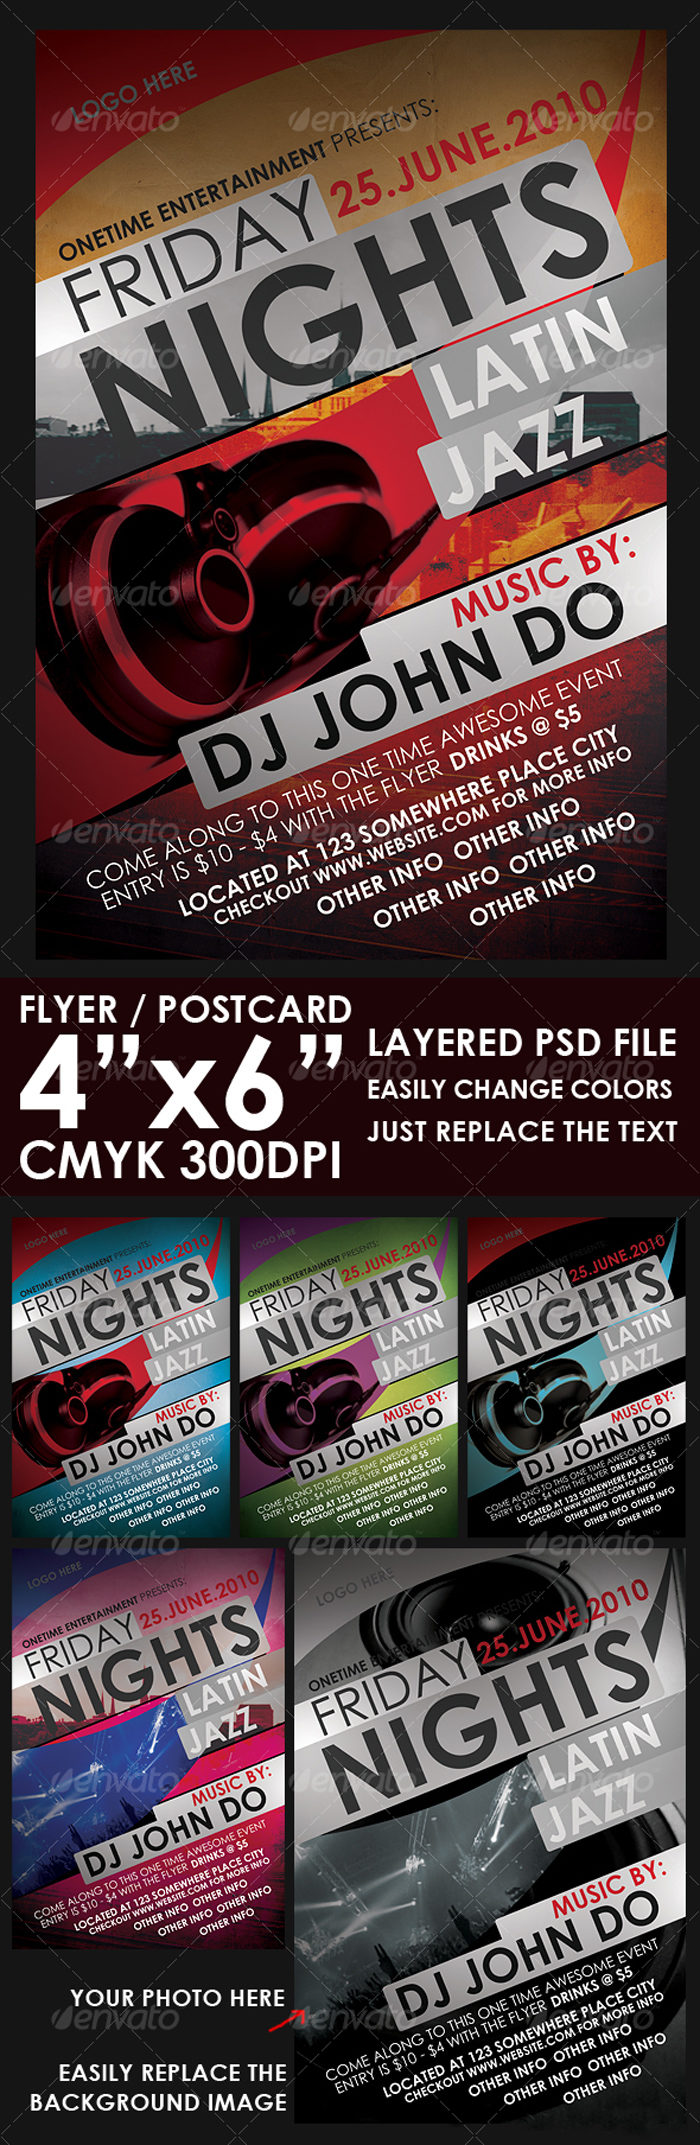 341113-700x2145 33 Flyer templates you should download for your clients